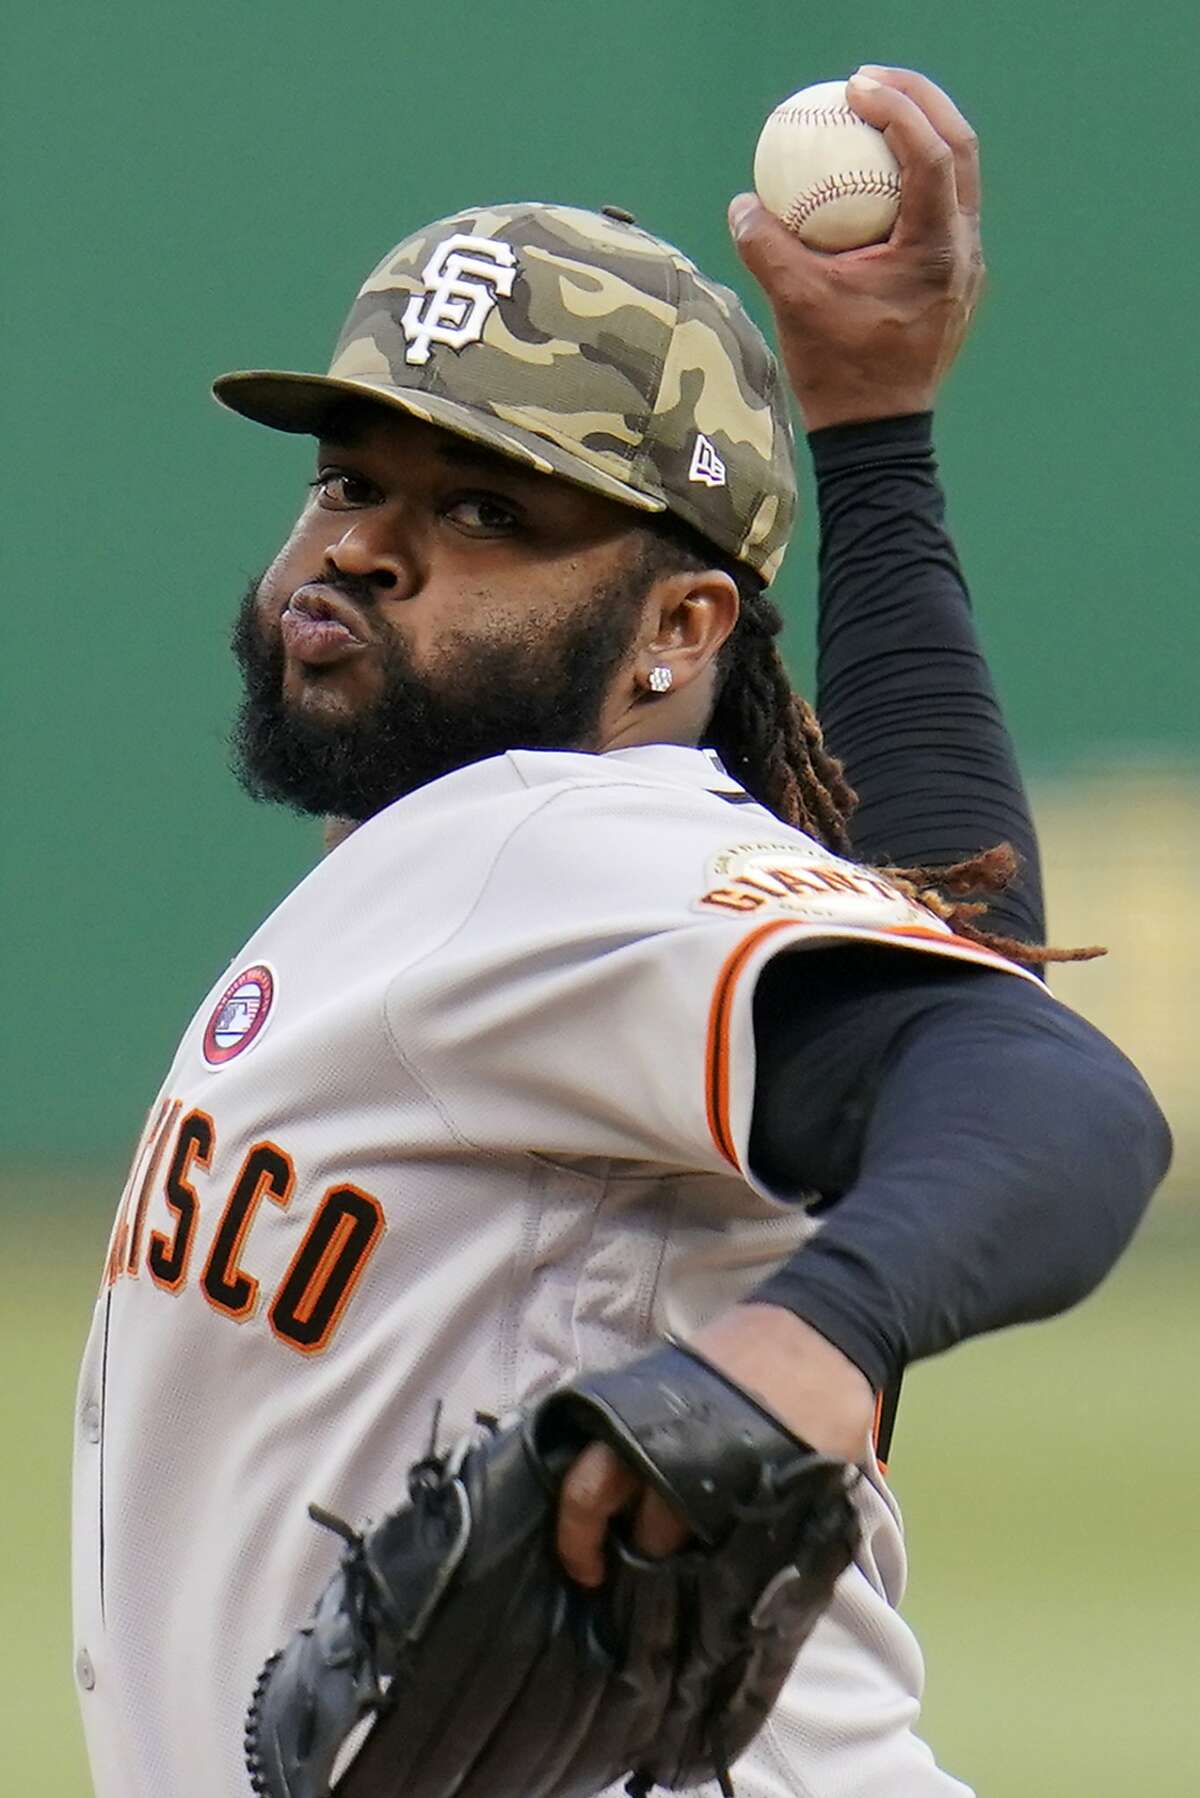 San Francisco Giants starting pitcher Johnny Cueto delivers during the first inning of a baseball game against the Pittsburgh Pirates in Pittsburgh, Saturday, May 15, 2021. (AP Photo/Gene J. Puskar)